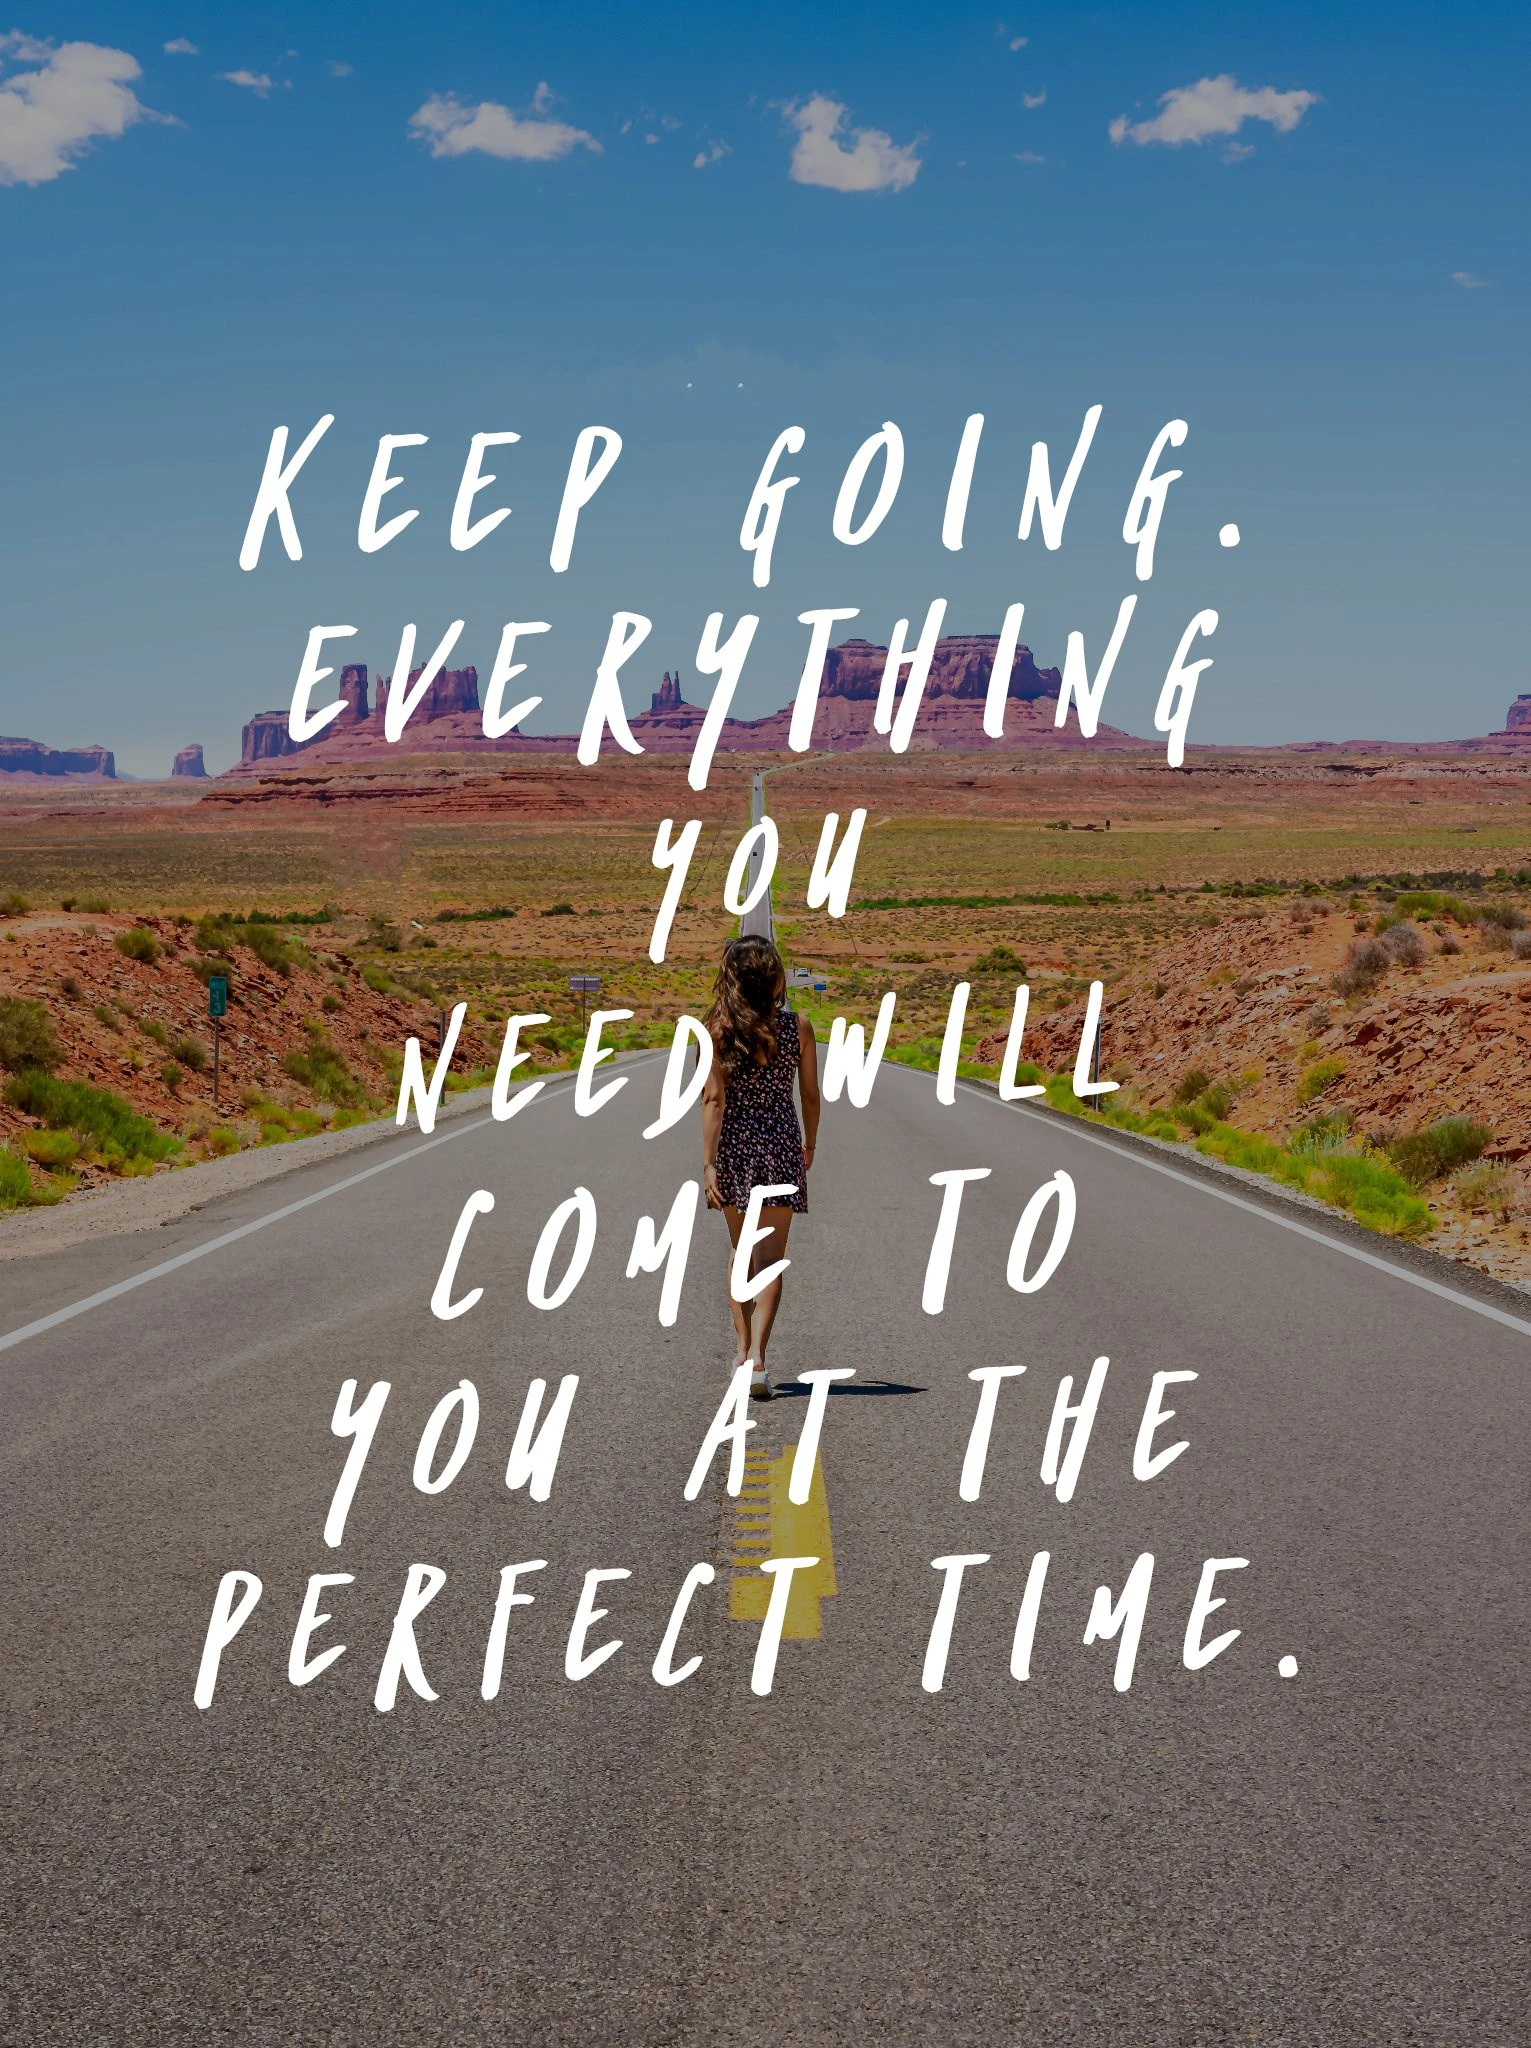 Keep going... everything you need will come to you at the perfect time!! 